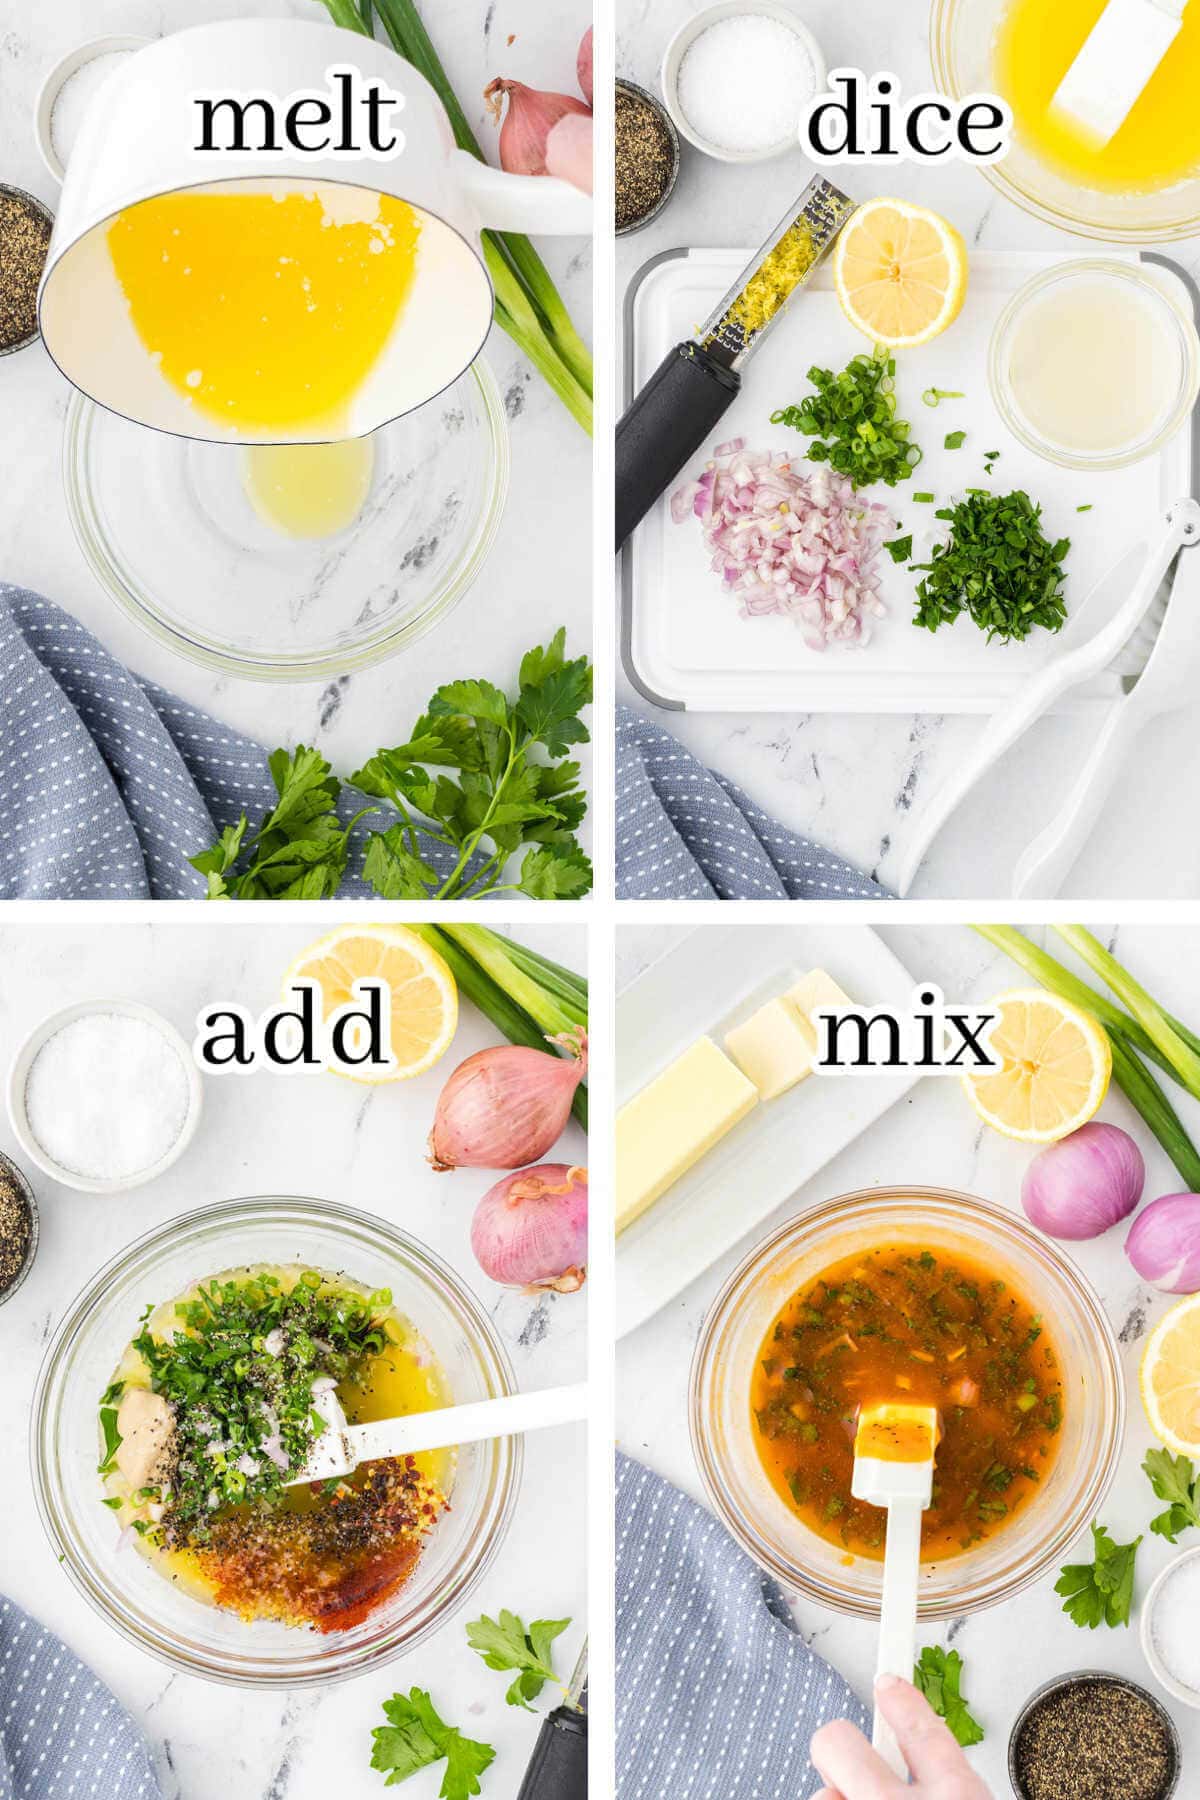 Step-by-step instructions to make recipe, with print overlay.